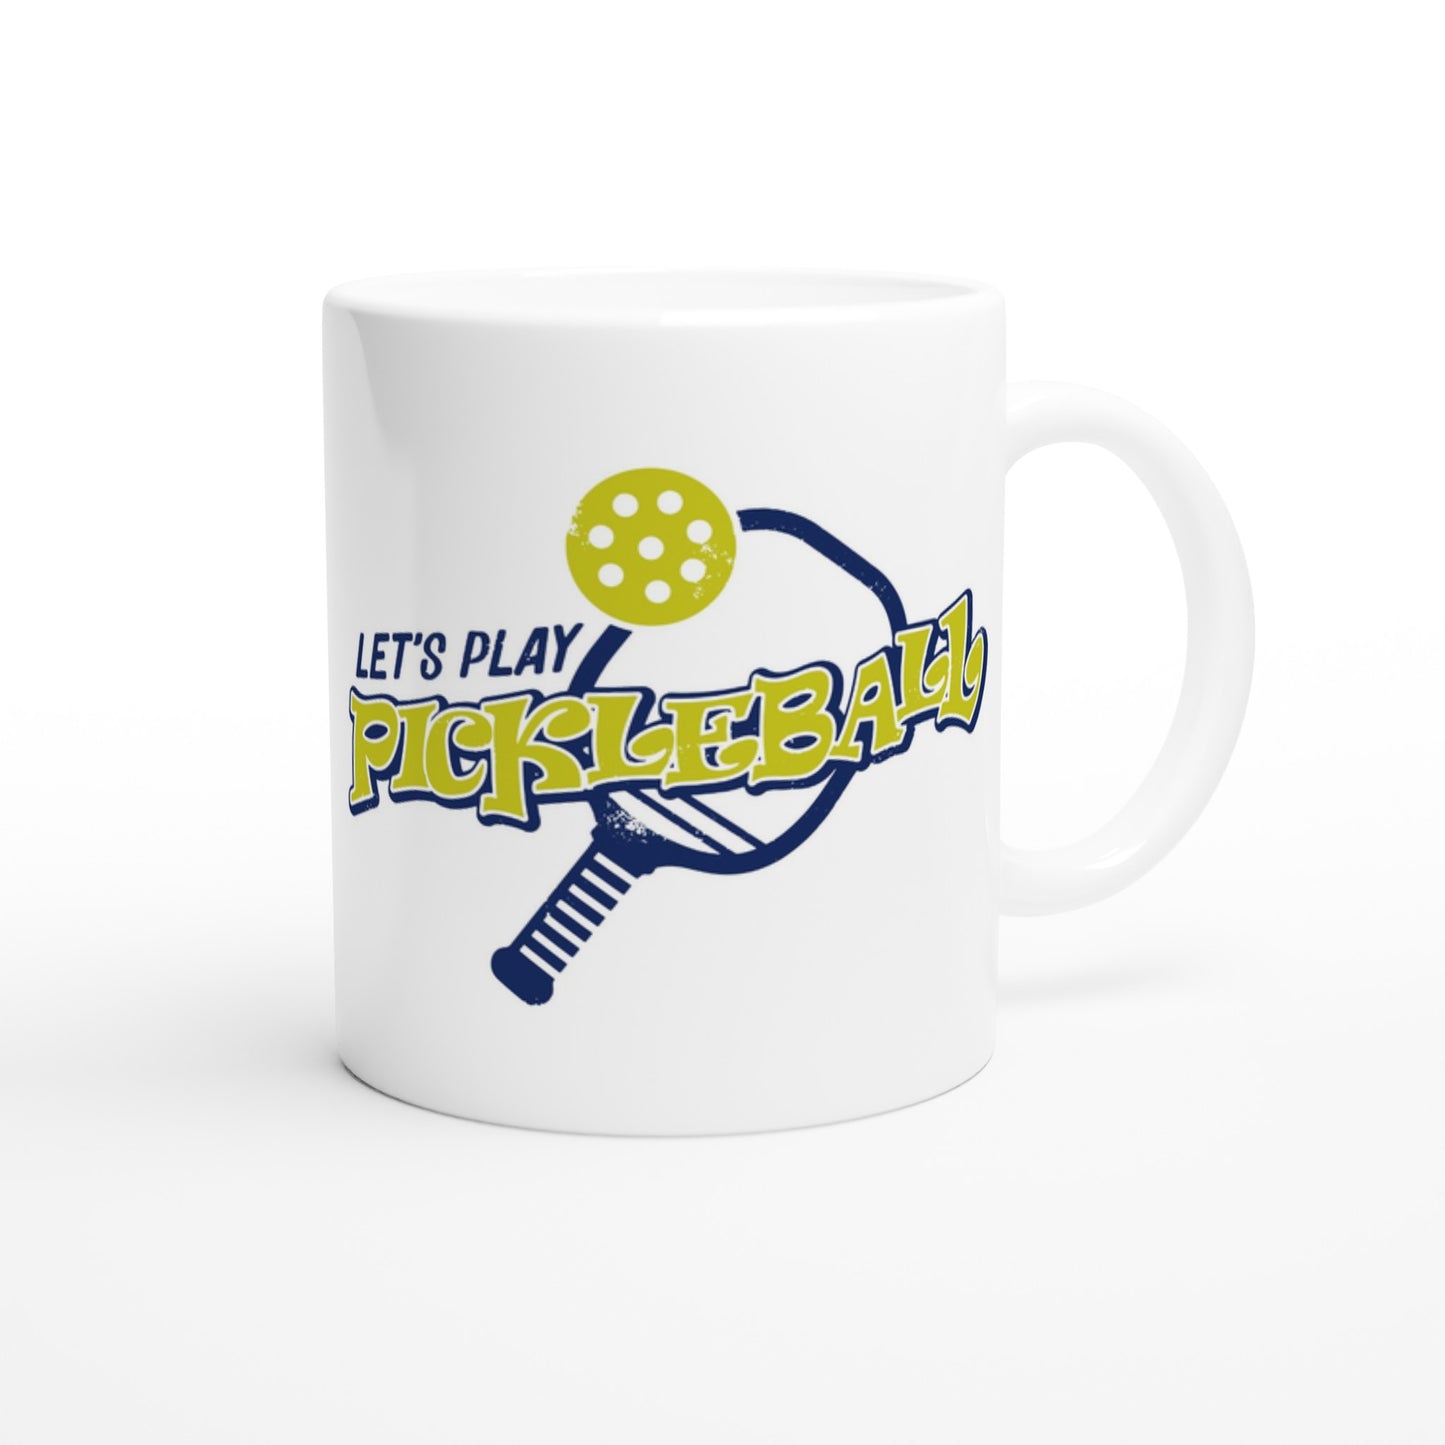 Personalized White ceramic 11oz mug with white handle Personalized with motto Your Name Would be a PickleBall Superstar if it wasn’t for that Darn net and those lines front side Let's Play PickleBall logo on back dishwasher and microwave safe ceramic coffee mug from WhatYa Say Apparel back view.